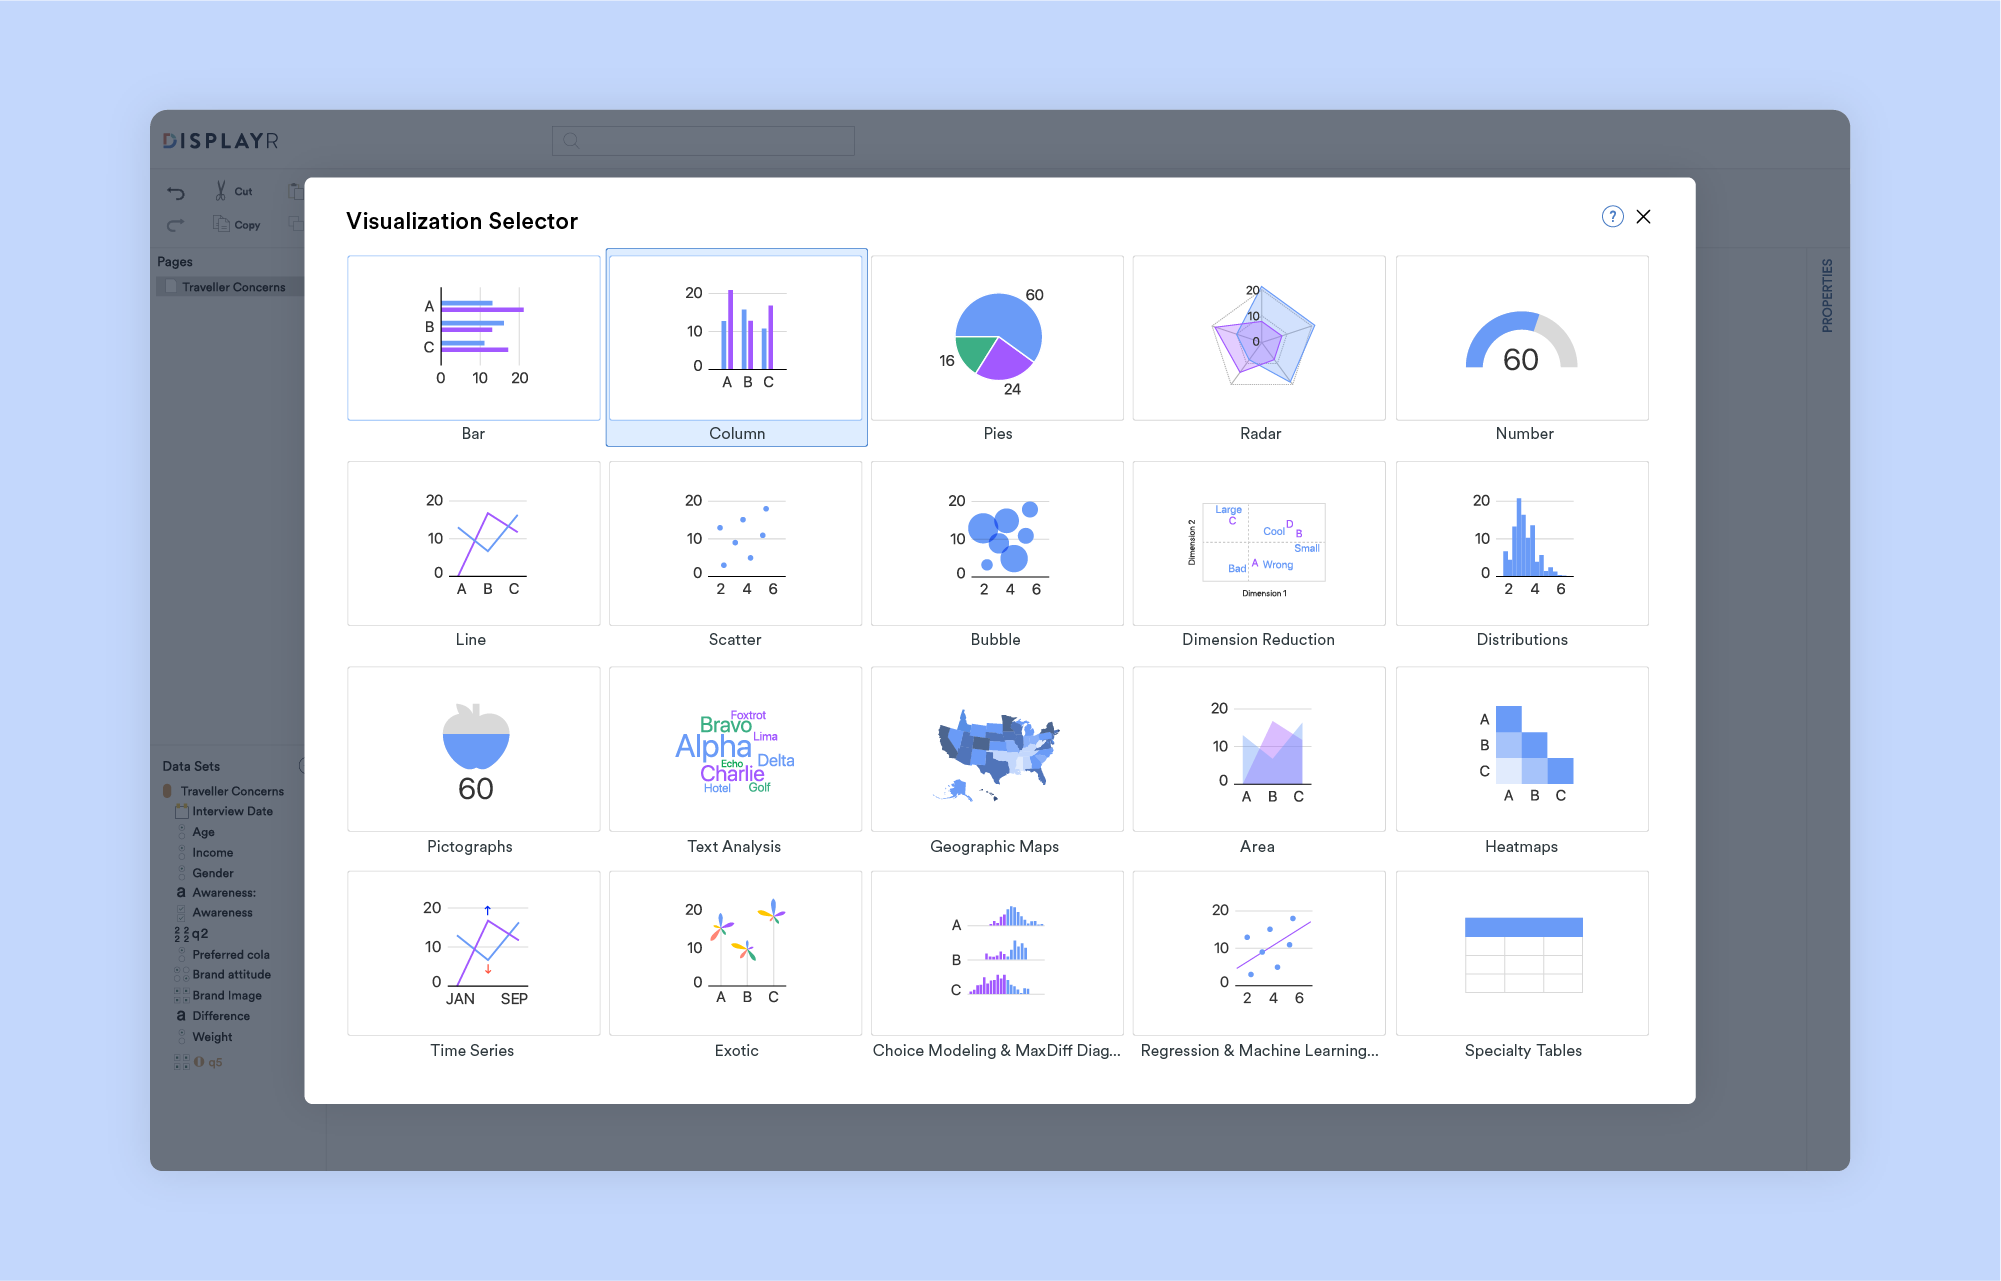 Easy for the novice, powerful for the expert. Analyze, report and publish dashboards. Automatically update everything with new data. Everything’s reproducible, Work collaboratively in real time. Secure cloud platform. Nothing’s missing.